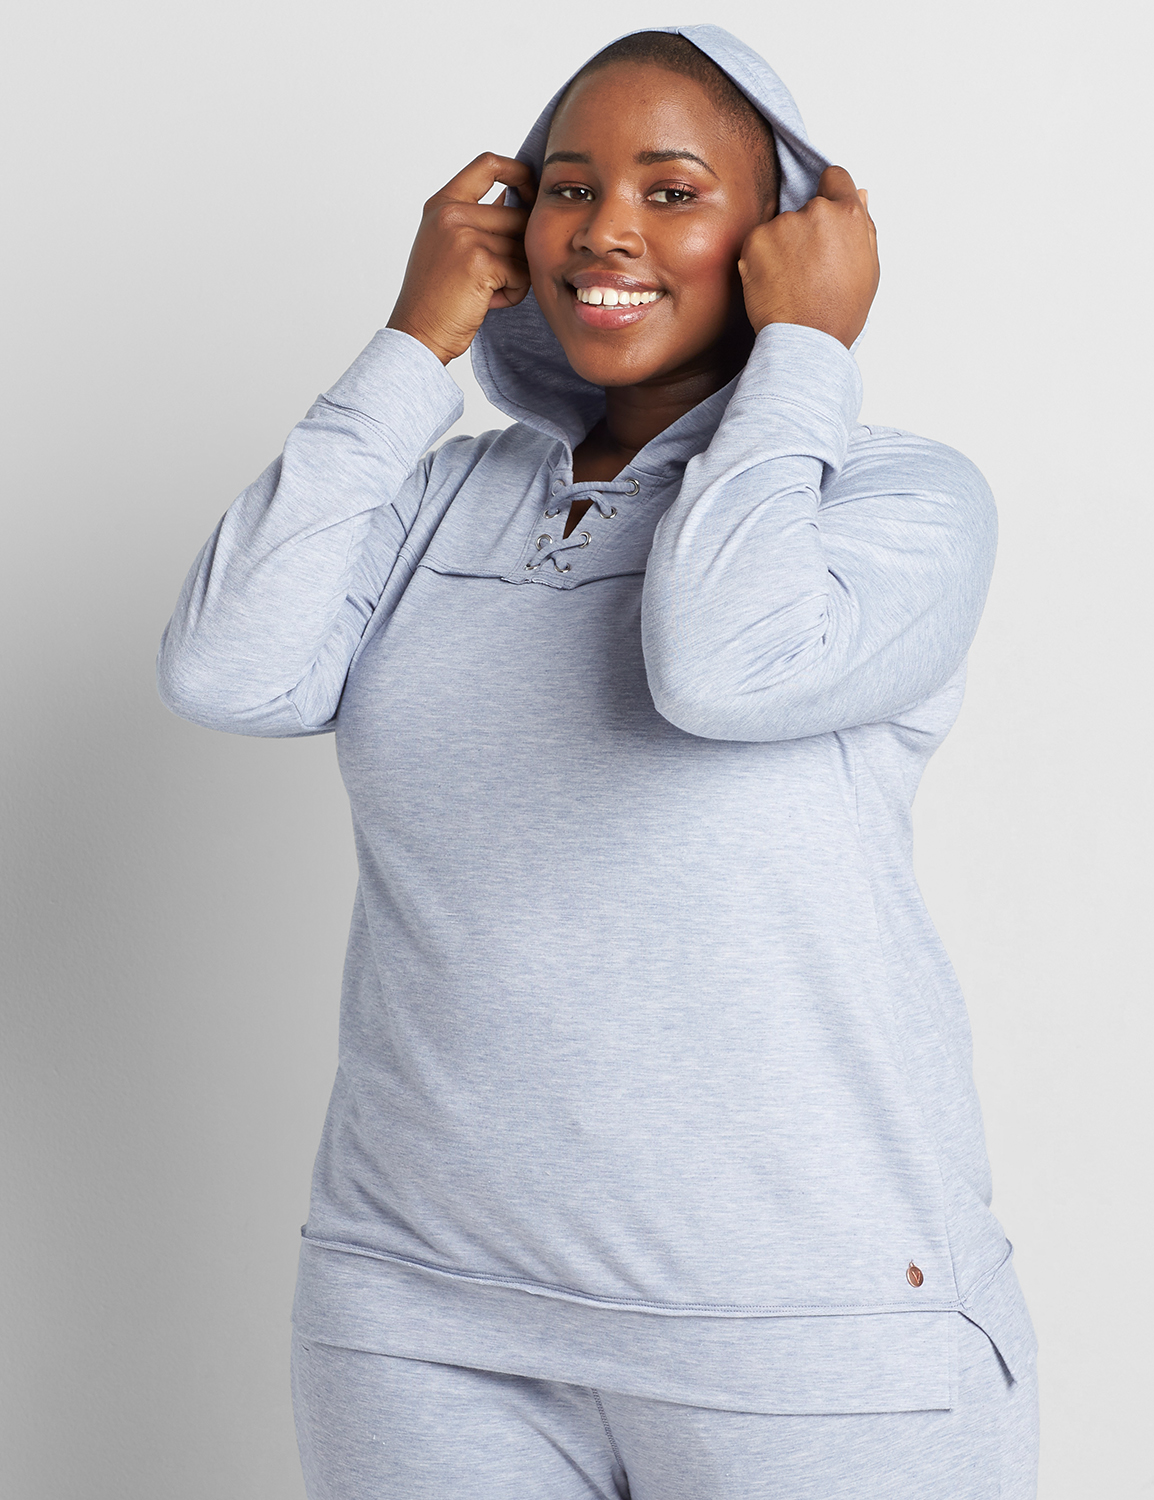 Major News: Lane Bryant to Introduce Extended Sizing Throughout Their Line